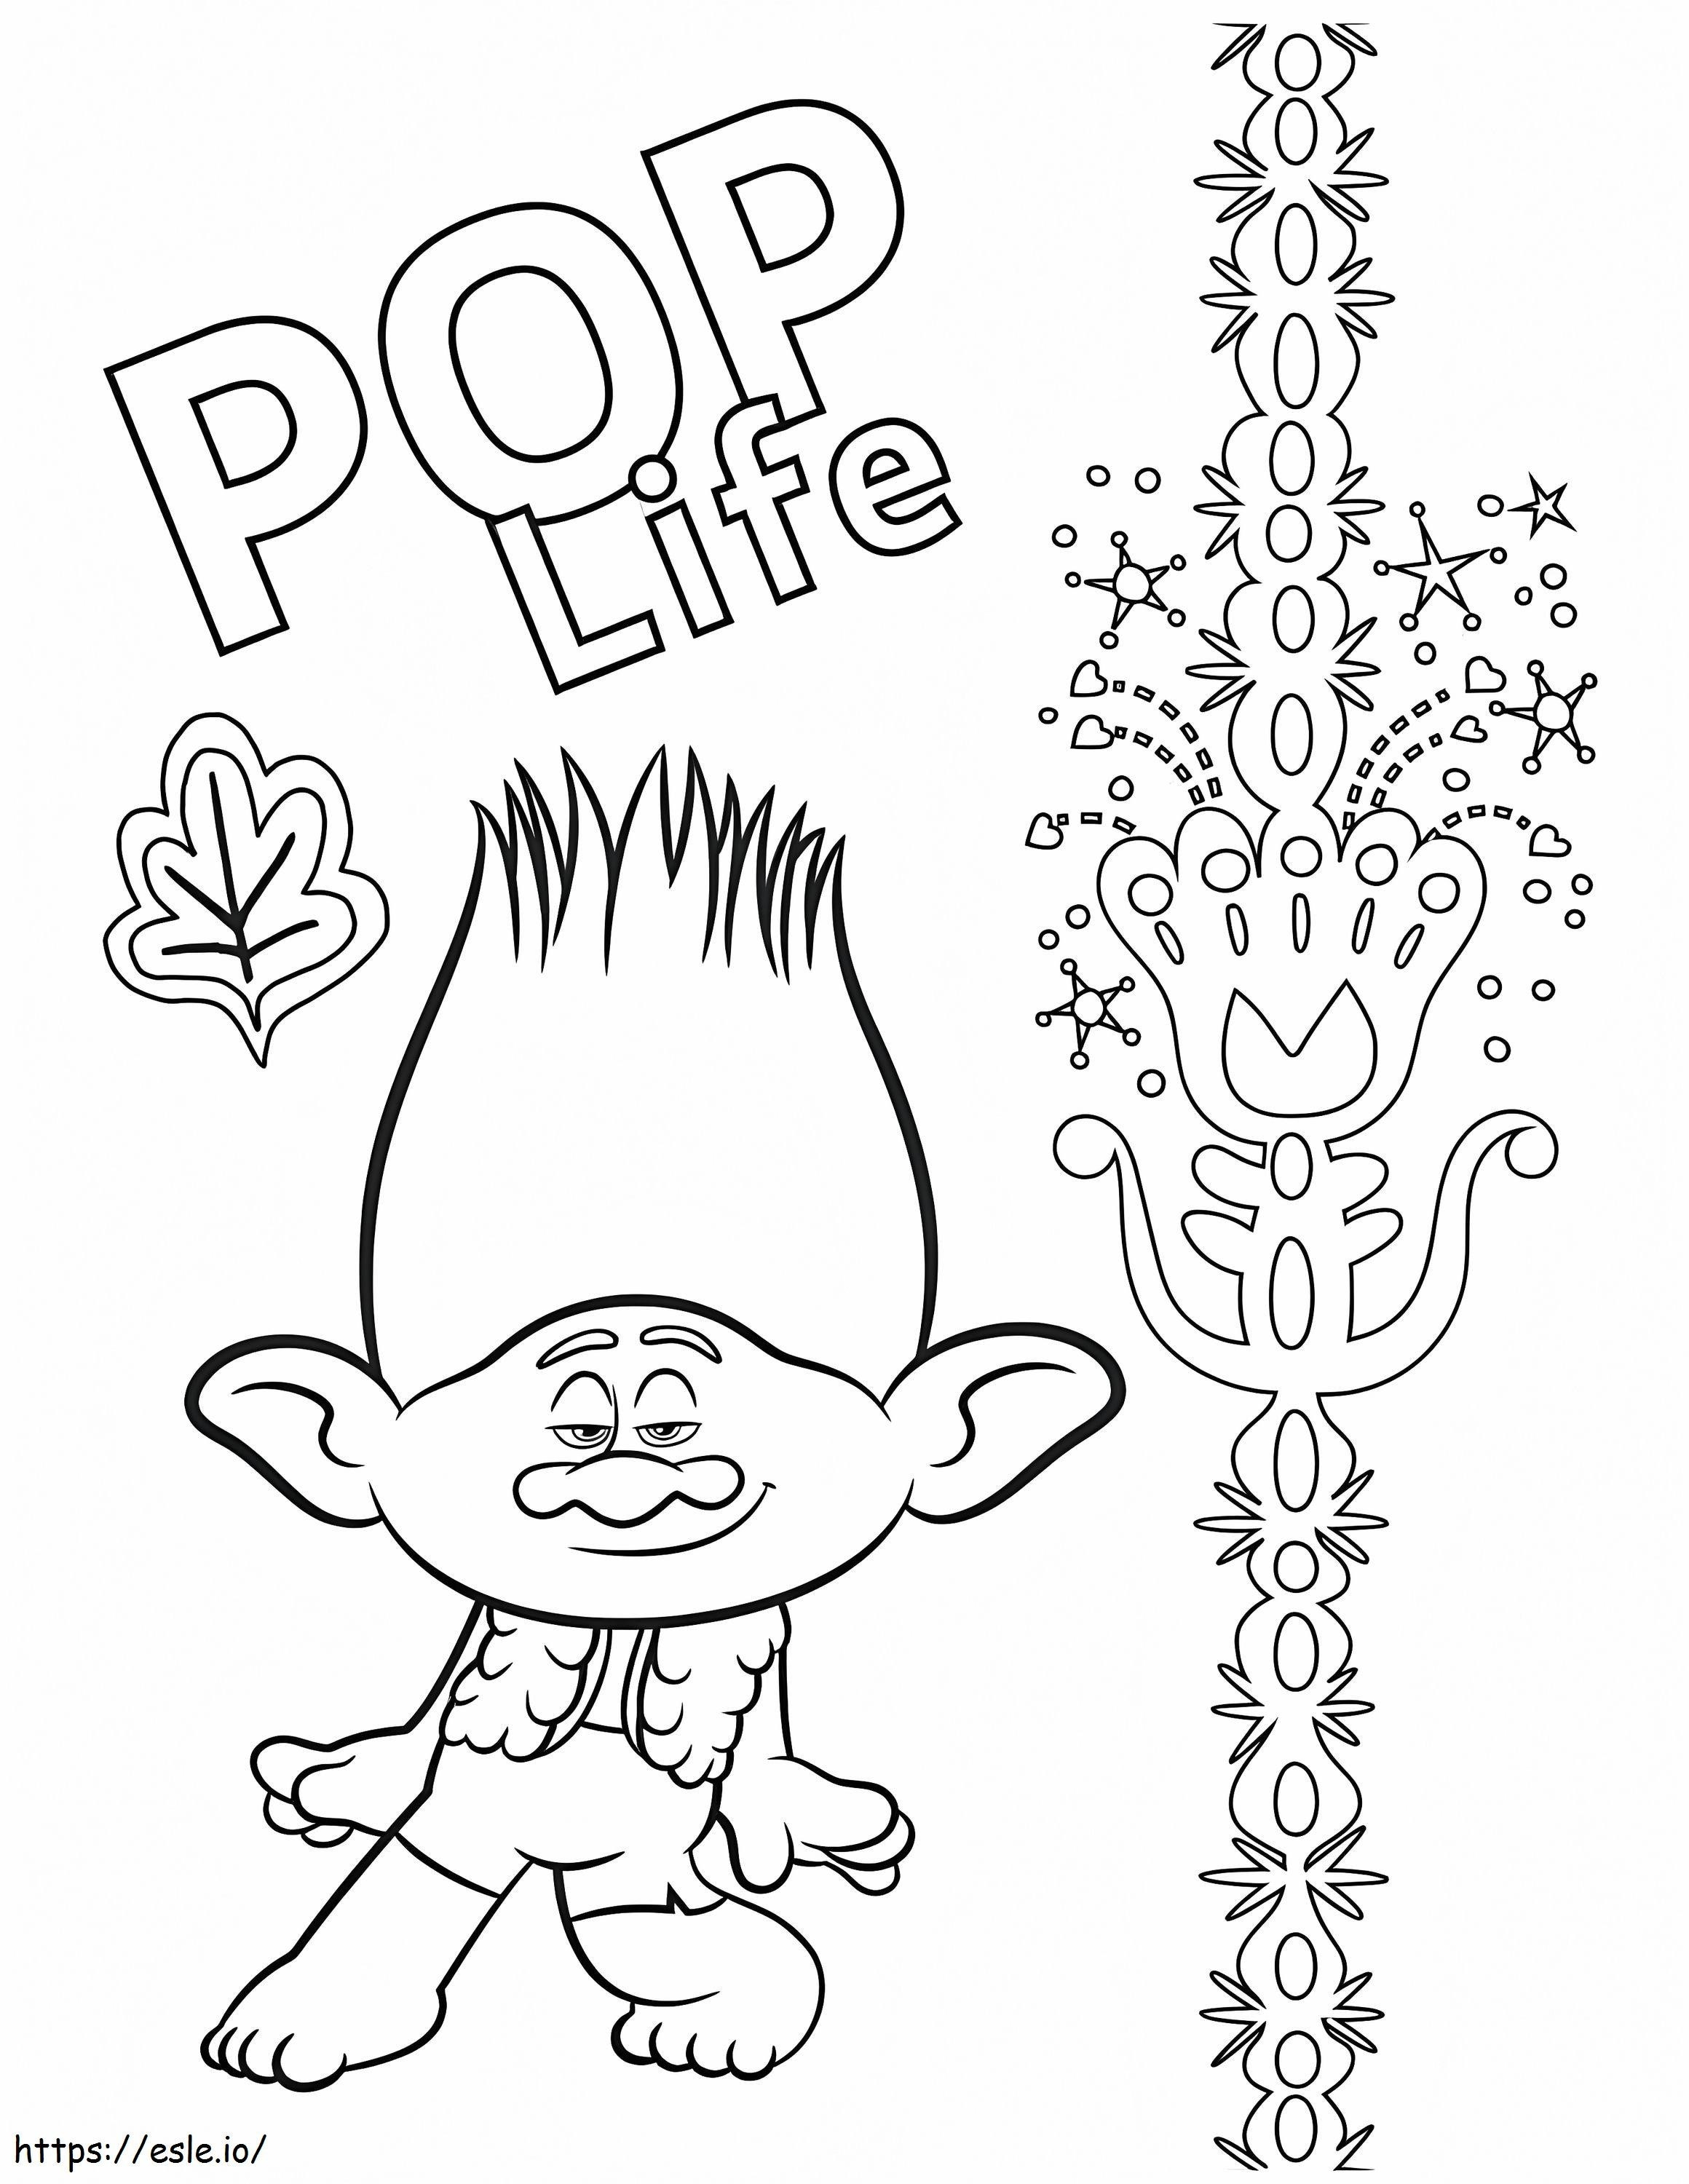 POP Life coloring page